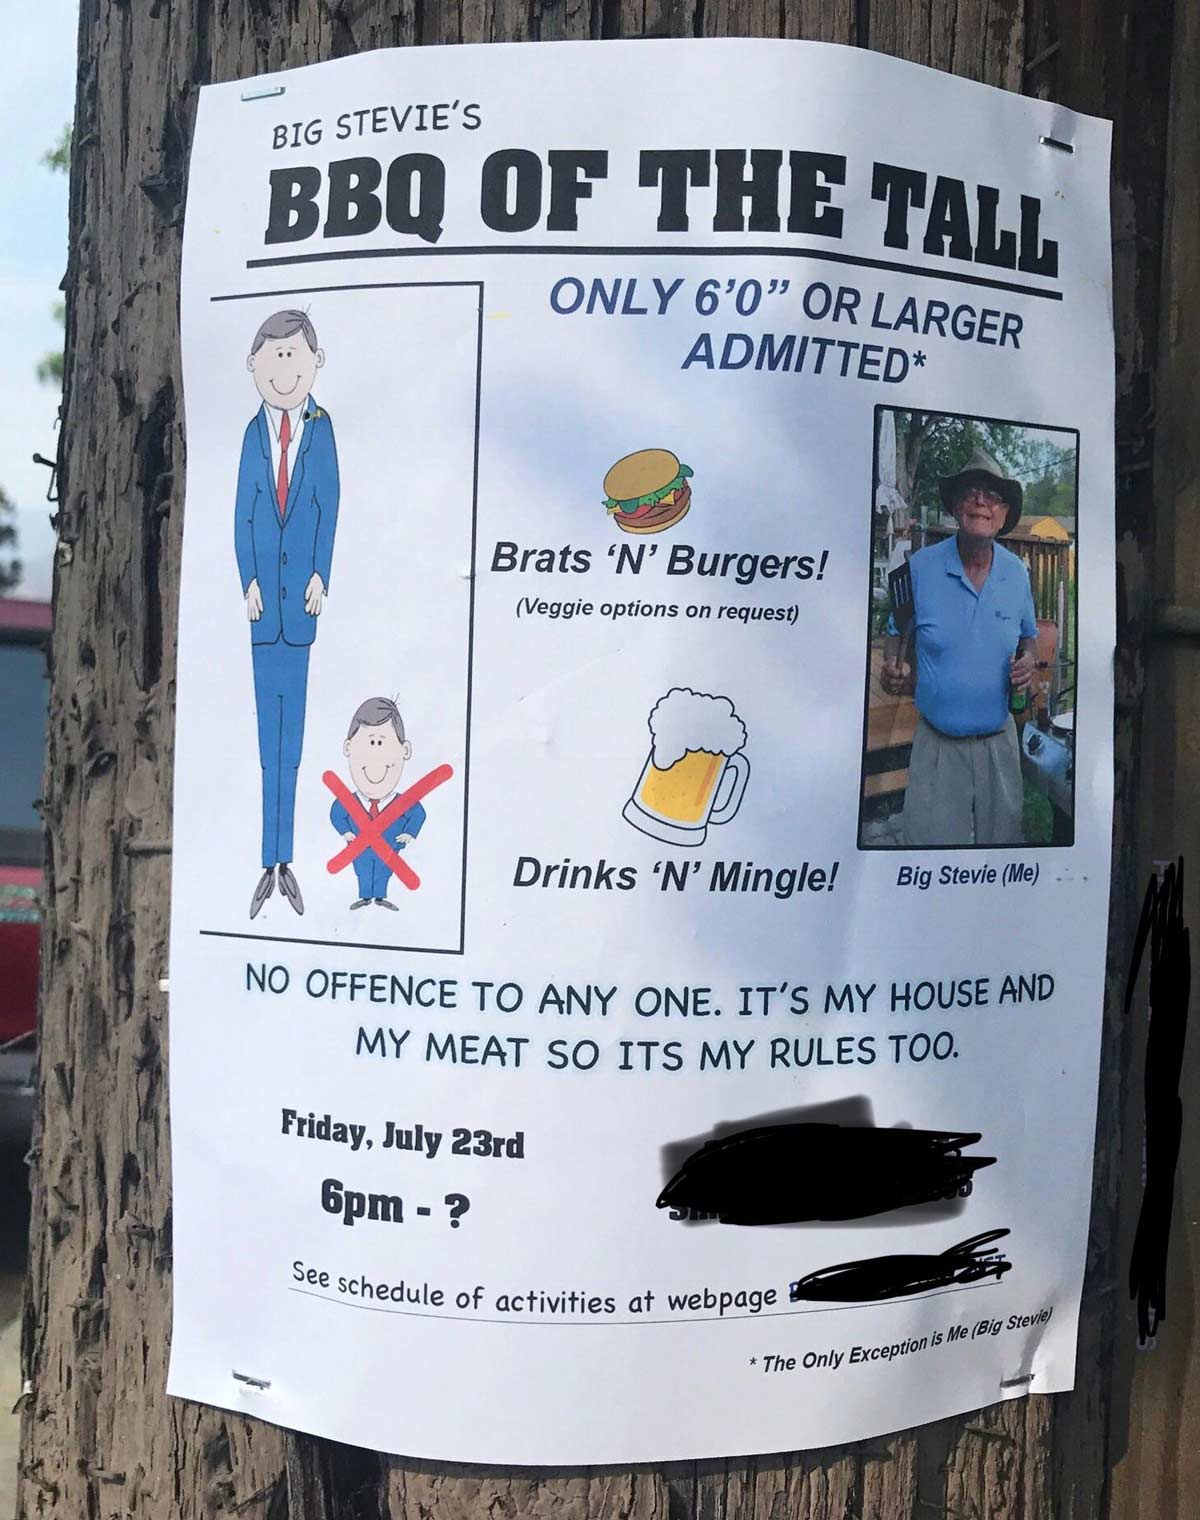 BBQ of the Tall